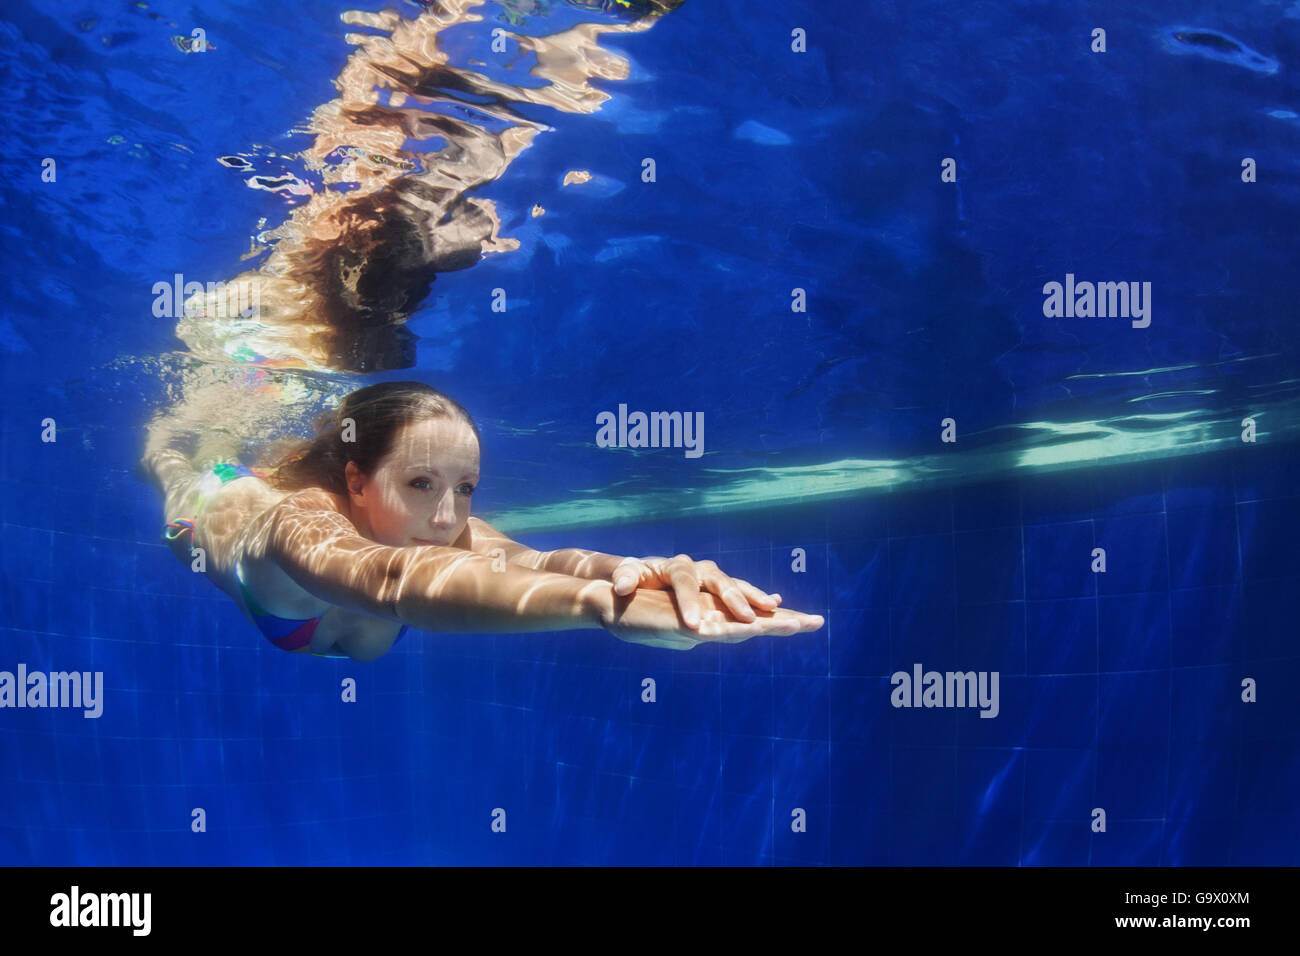 Beautiful young woman dive underwater with fun from poolside to blue pool. Healthy active lifestyle, people water sport activity Stock Photo